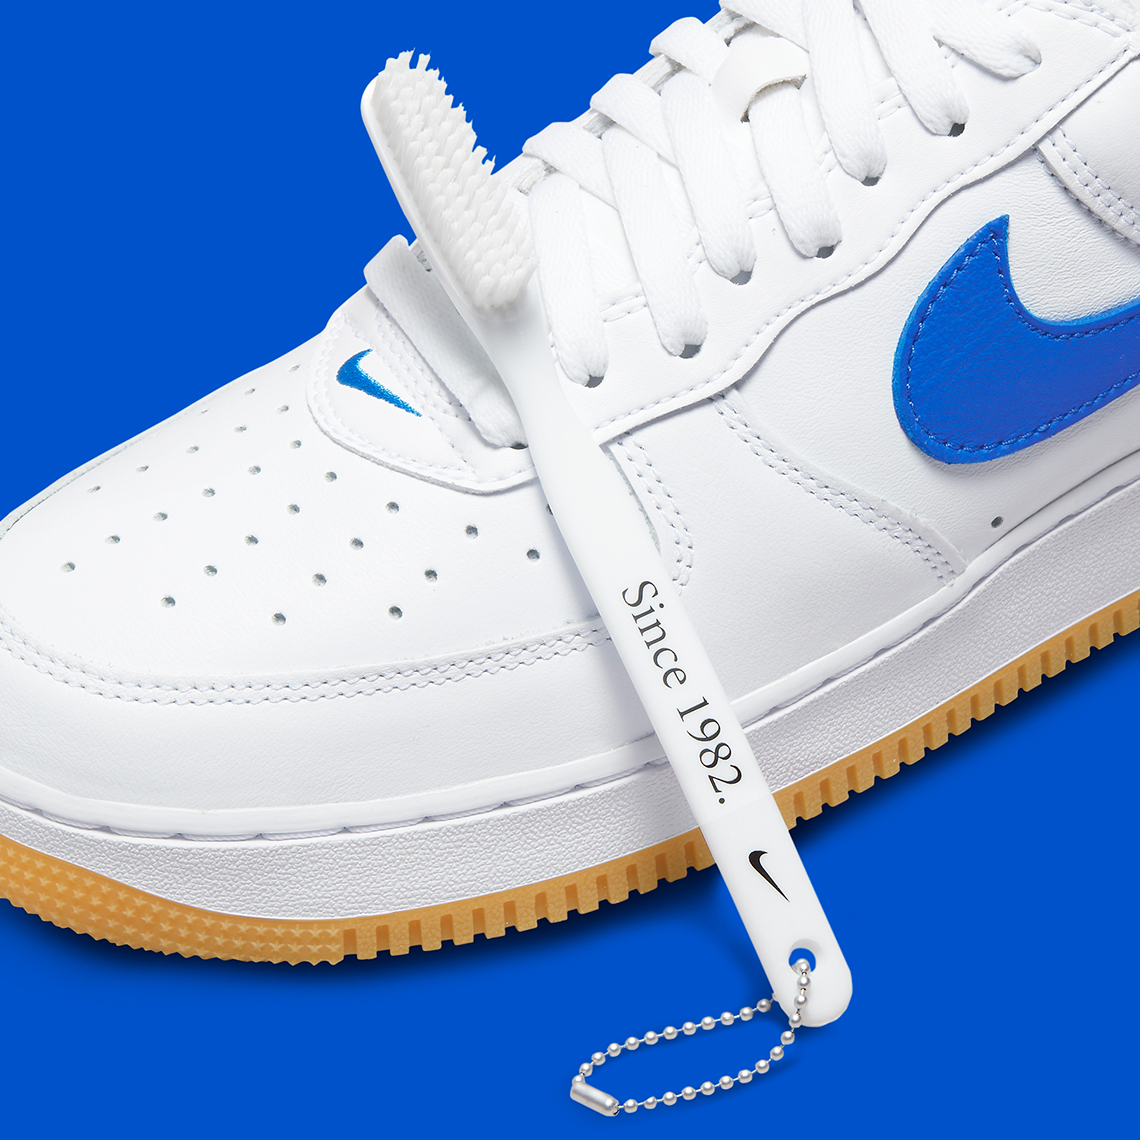 nike air force 1 low since 82 toothbrush dj3911 101 3